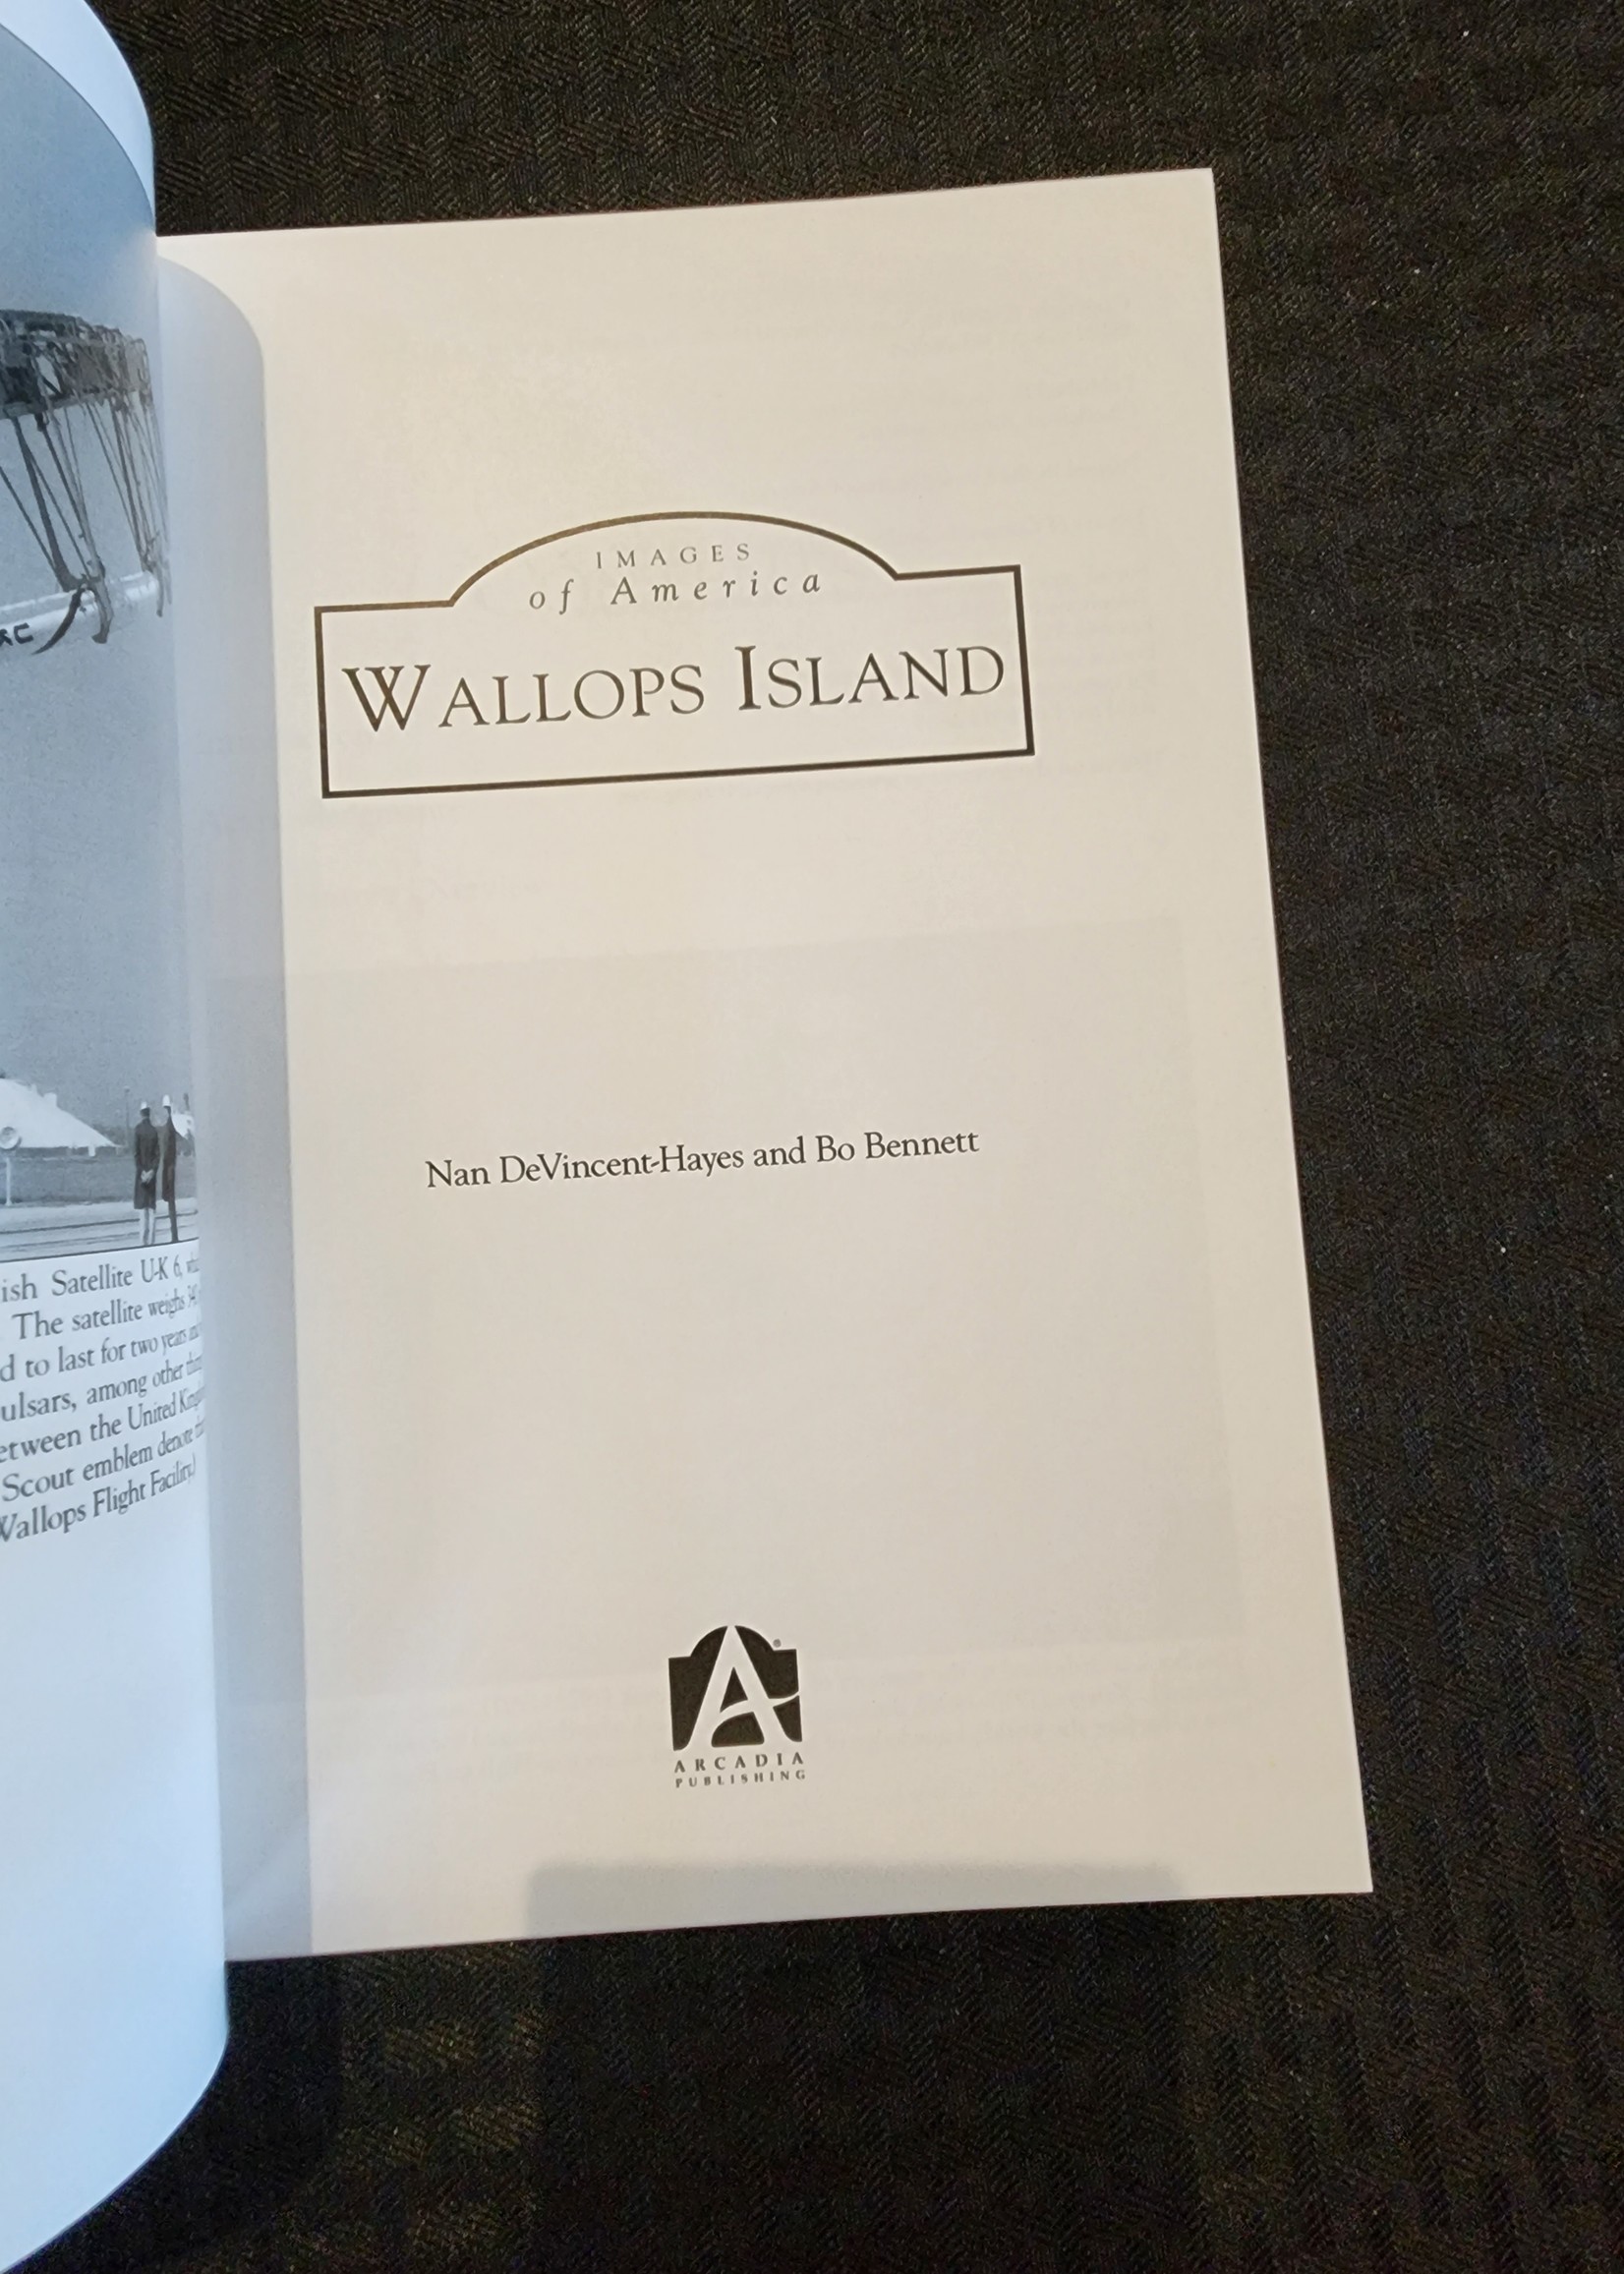 Images of America Wallops Island: Images of America